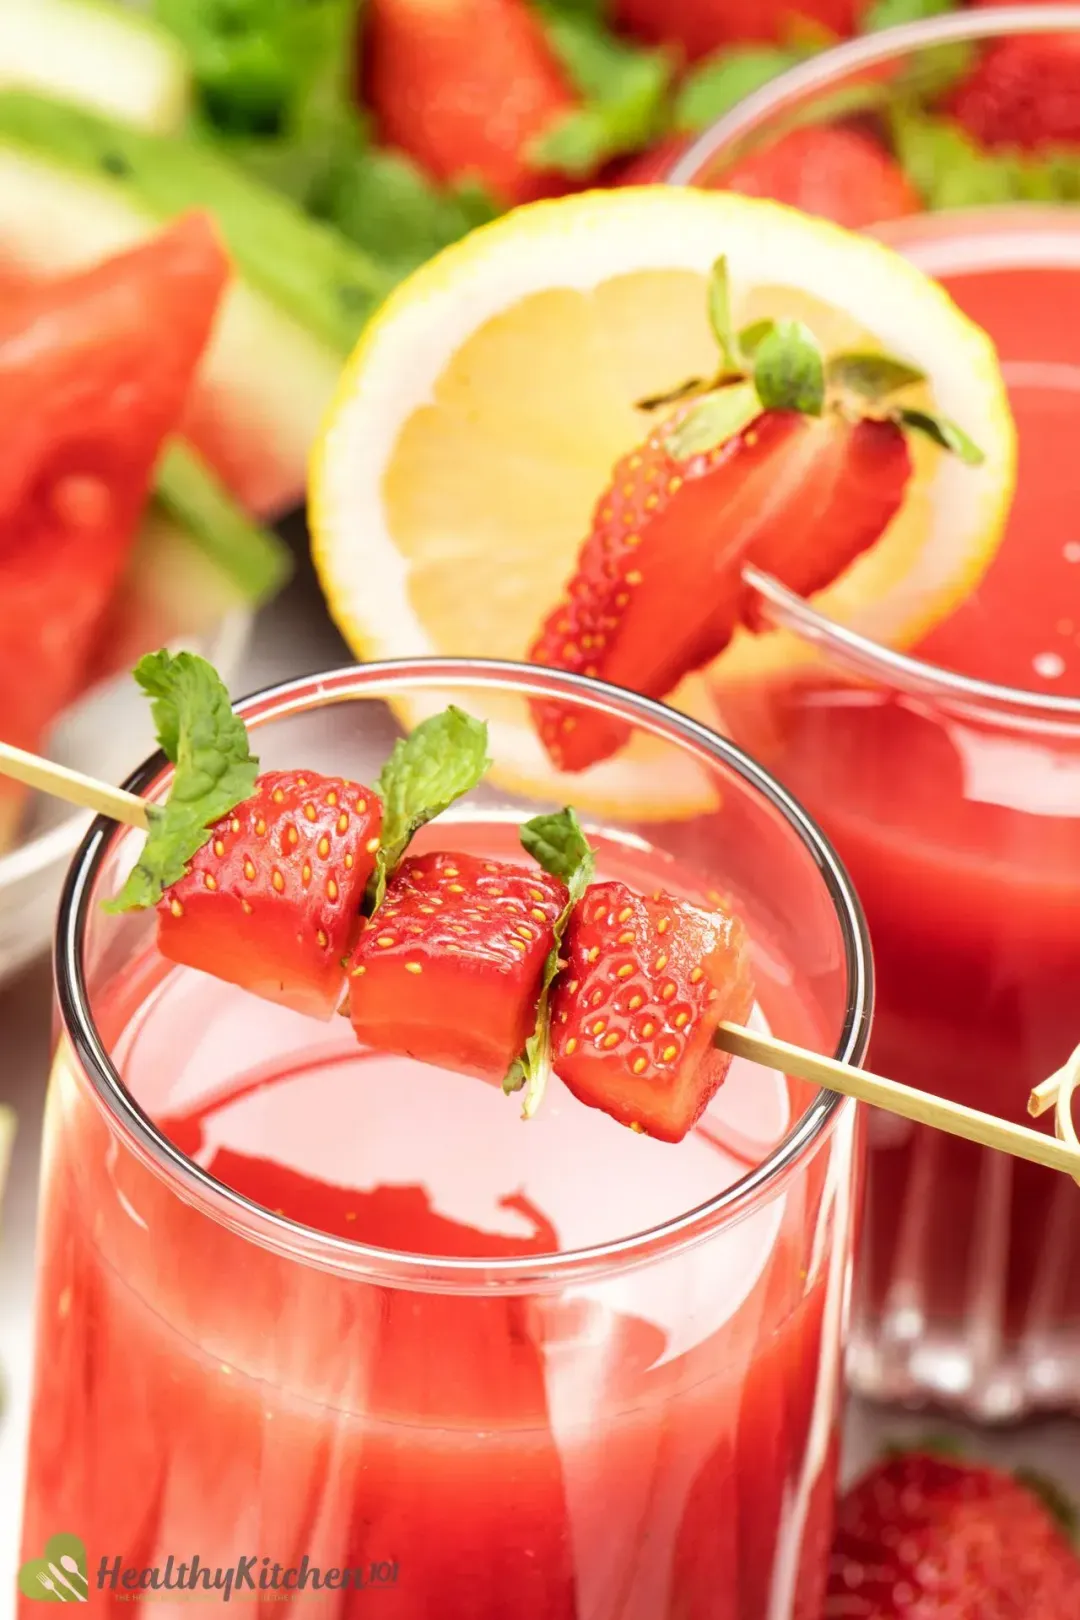 Calories in watermelon strawberry juice